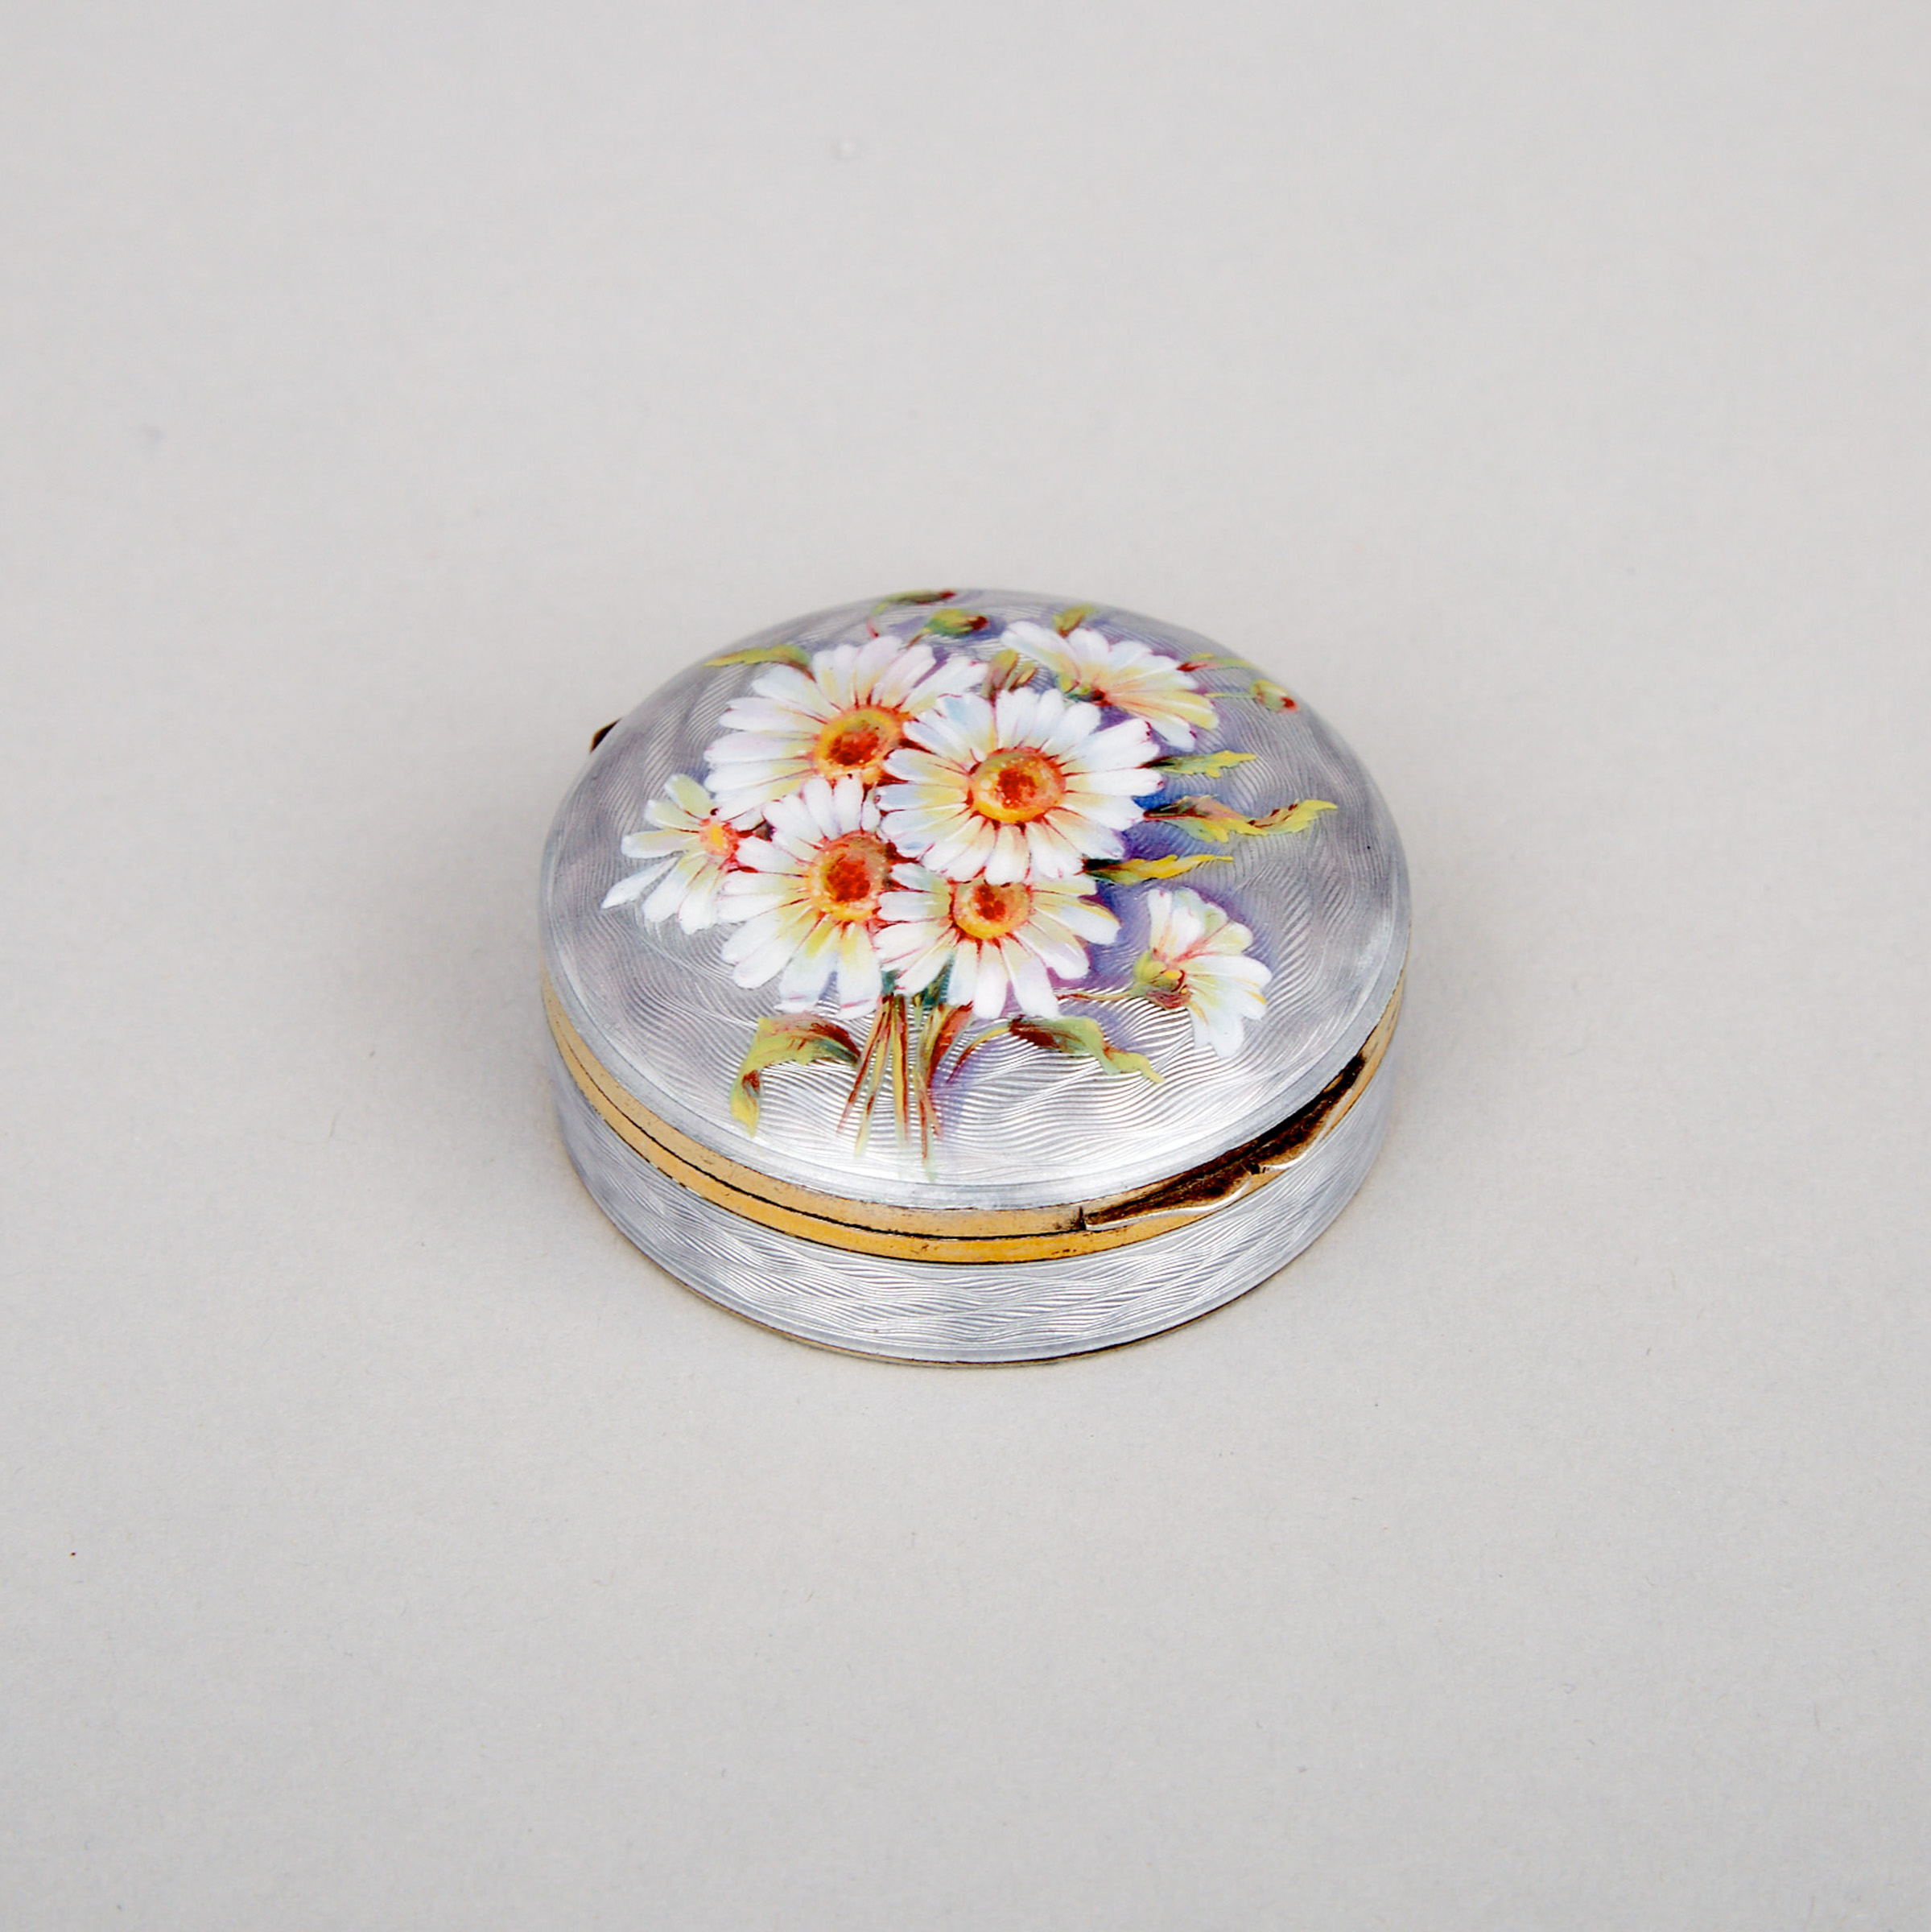 Continental Silver and Painted Guilloché Enamel Circular Box, early 20th century